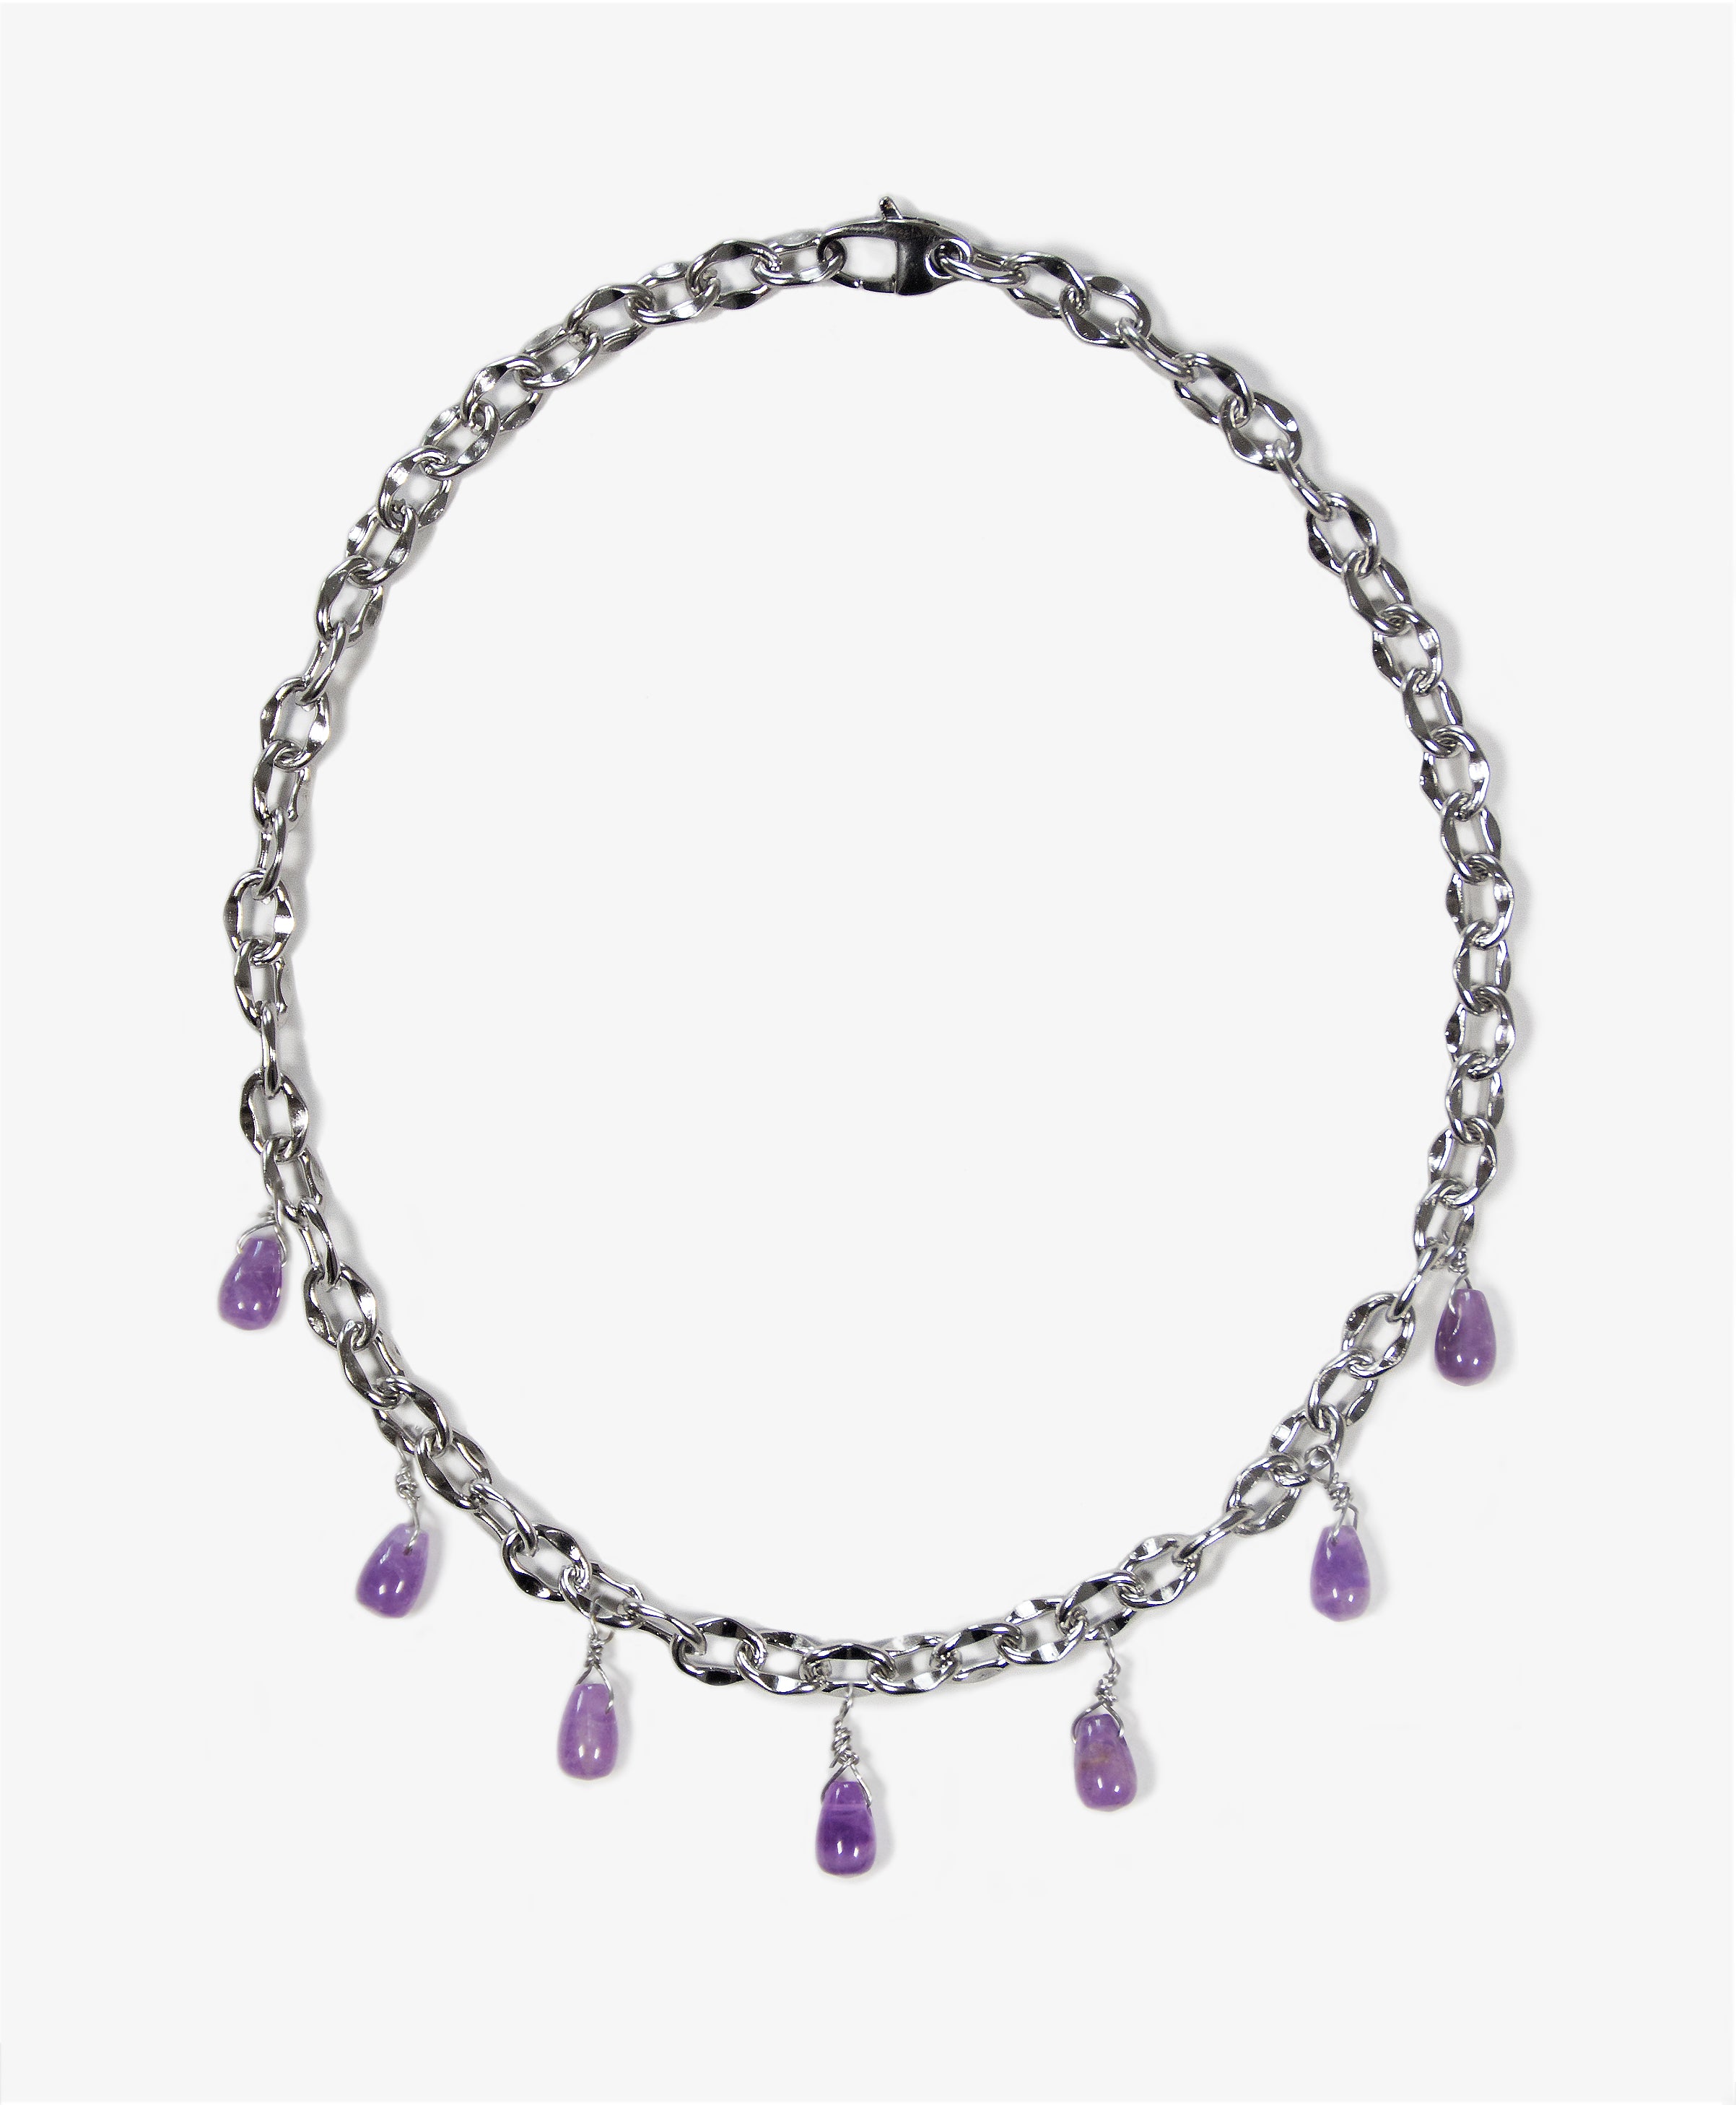 llayers-mens-women-jewelry-silver-stainlesssteel-choker-chain-necklace-unchained-009-amethyst-Brooklyn-New-York-F1